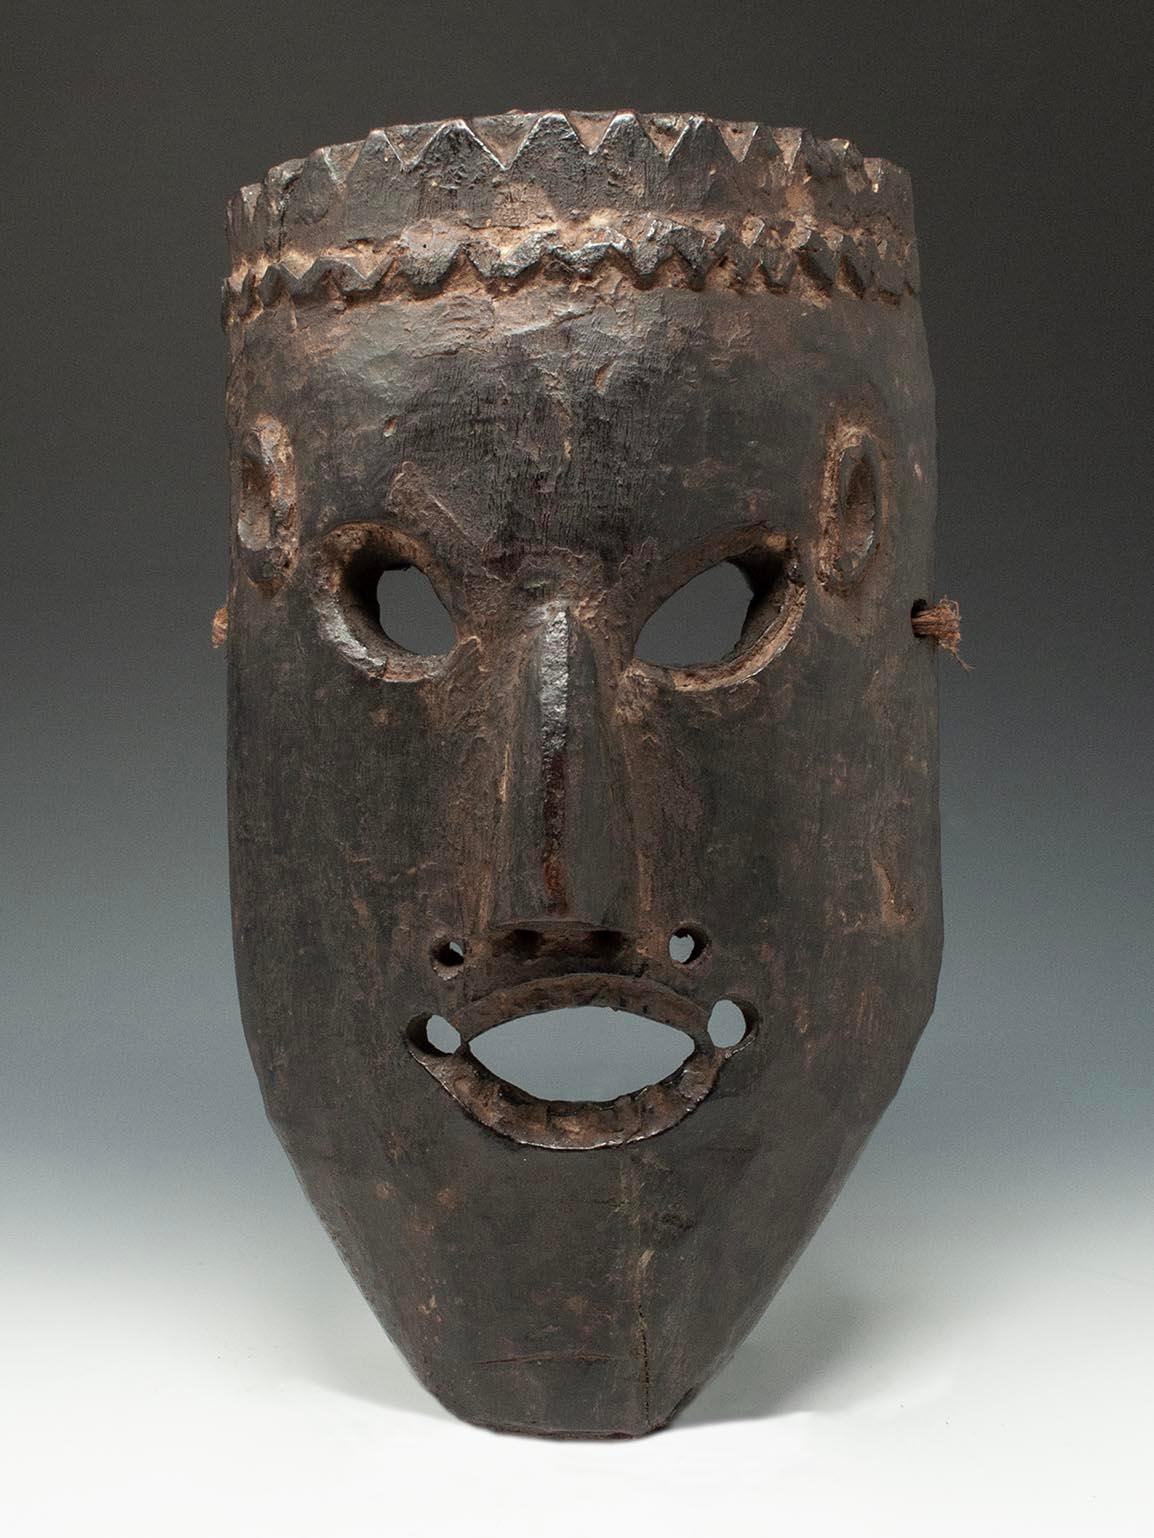 Late 19th-early 20th century Tribal mask, West Nepal

A mask from West Nepal with slanted almond shaped eyes, very small ears and an oval mouth showing carved upper and lower teeth over a strong squared chin. There is a jagged crown carved around